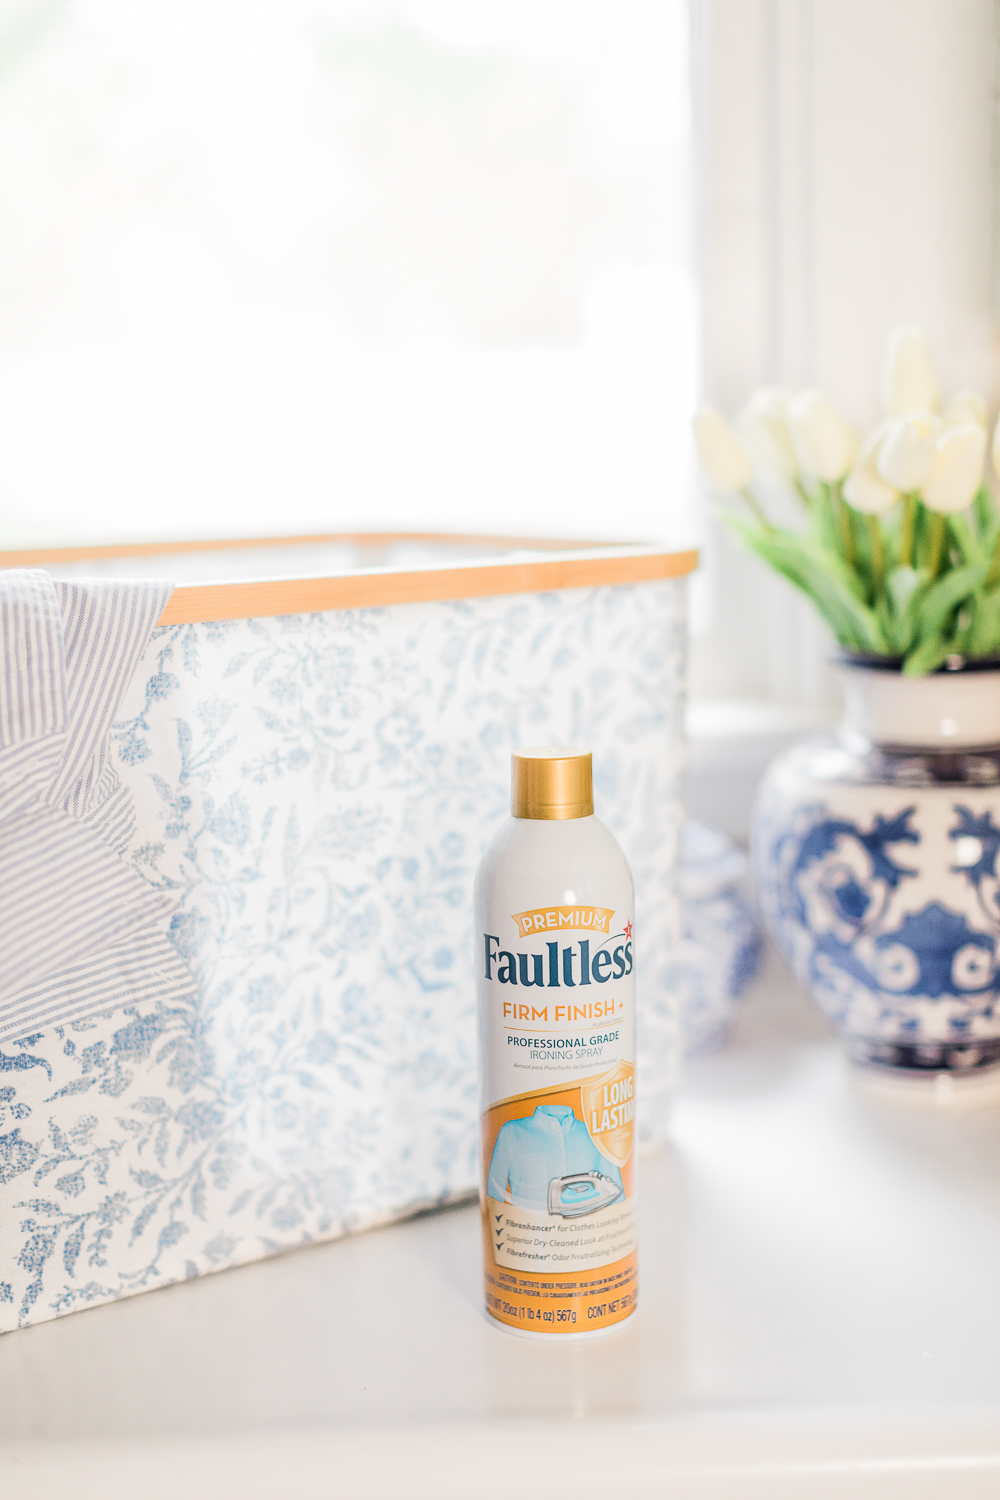 Faultless Premium Starch Spray at Walmart, how to use starch spray, how to use spray starch, how does spray starch work, Niagara Faultless Premium Starch spray uses, How to Use Starch Spray + 5 Must-Know Budget-Friendly Clothing Hacks by affordable fashion blogger Stephanie Ziajka from Diary of a Debutante